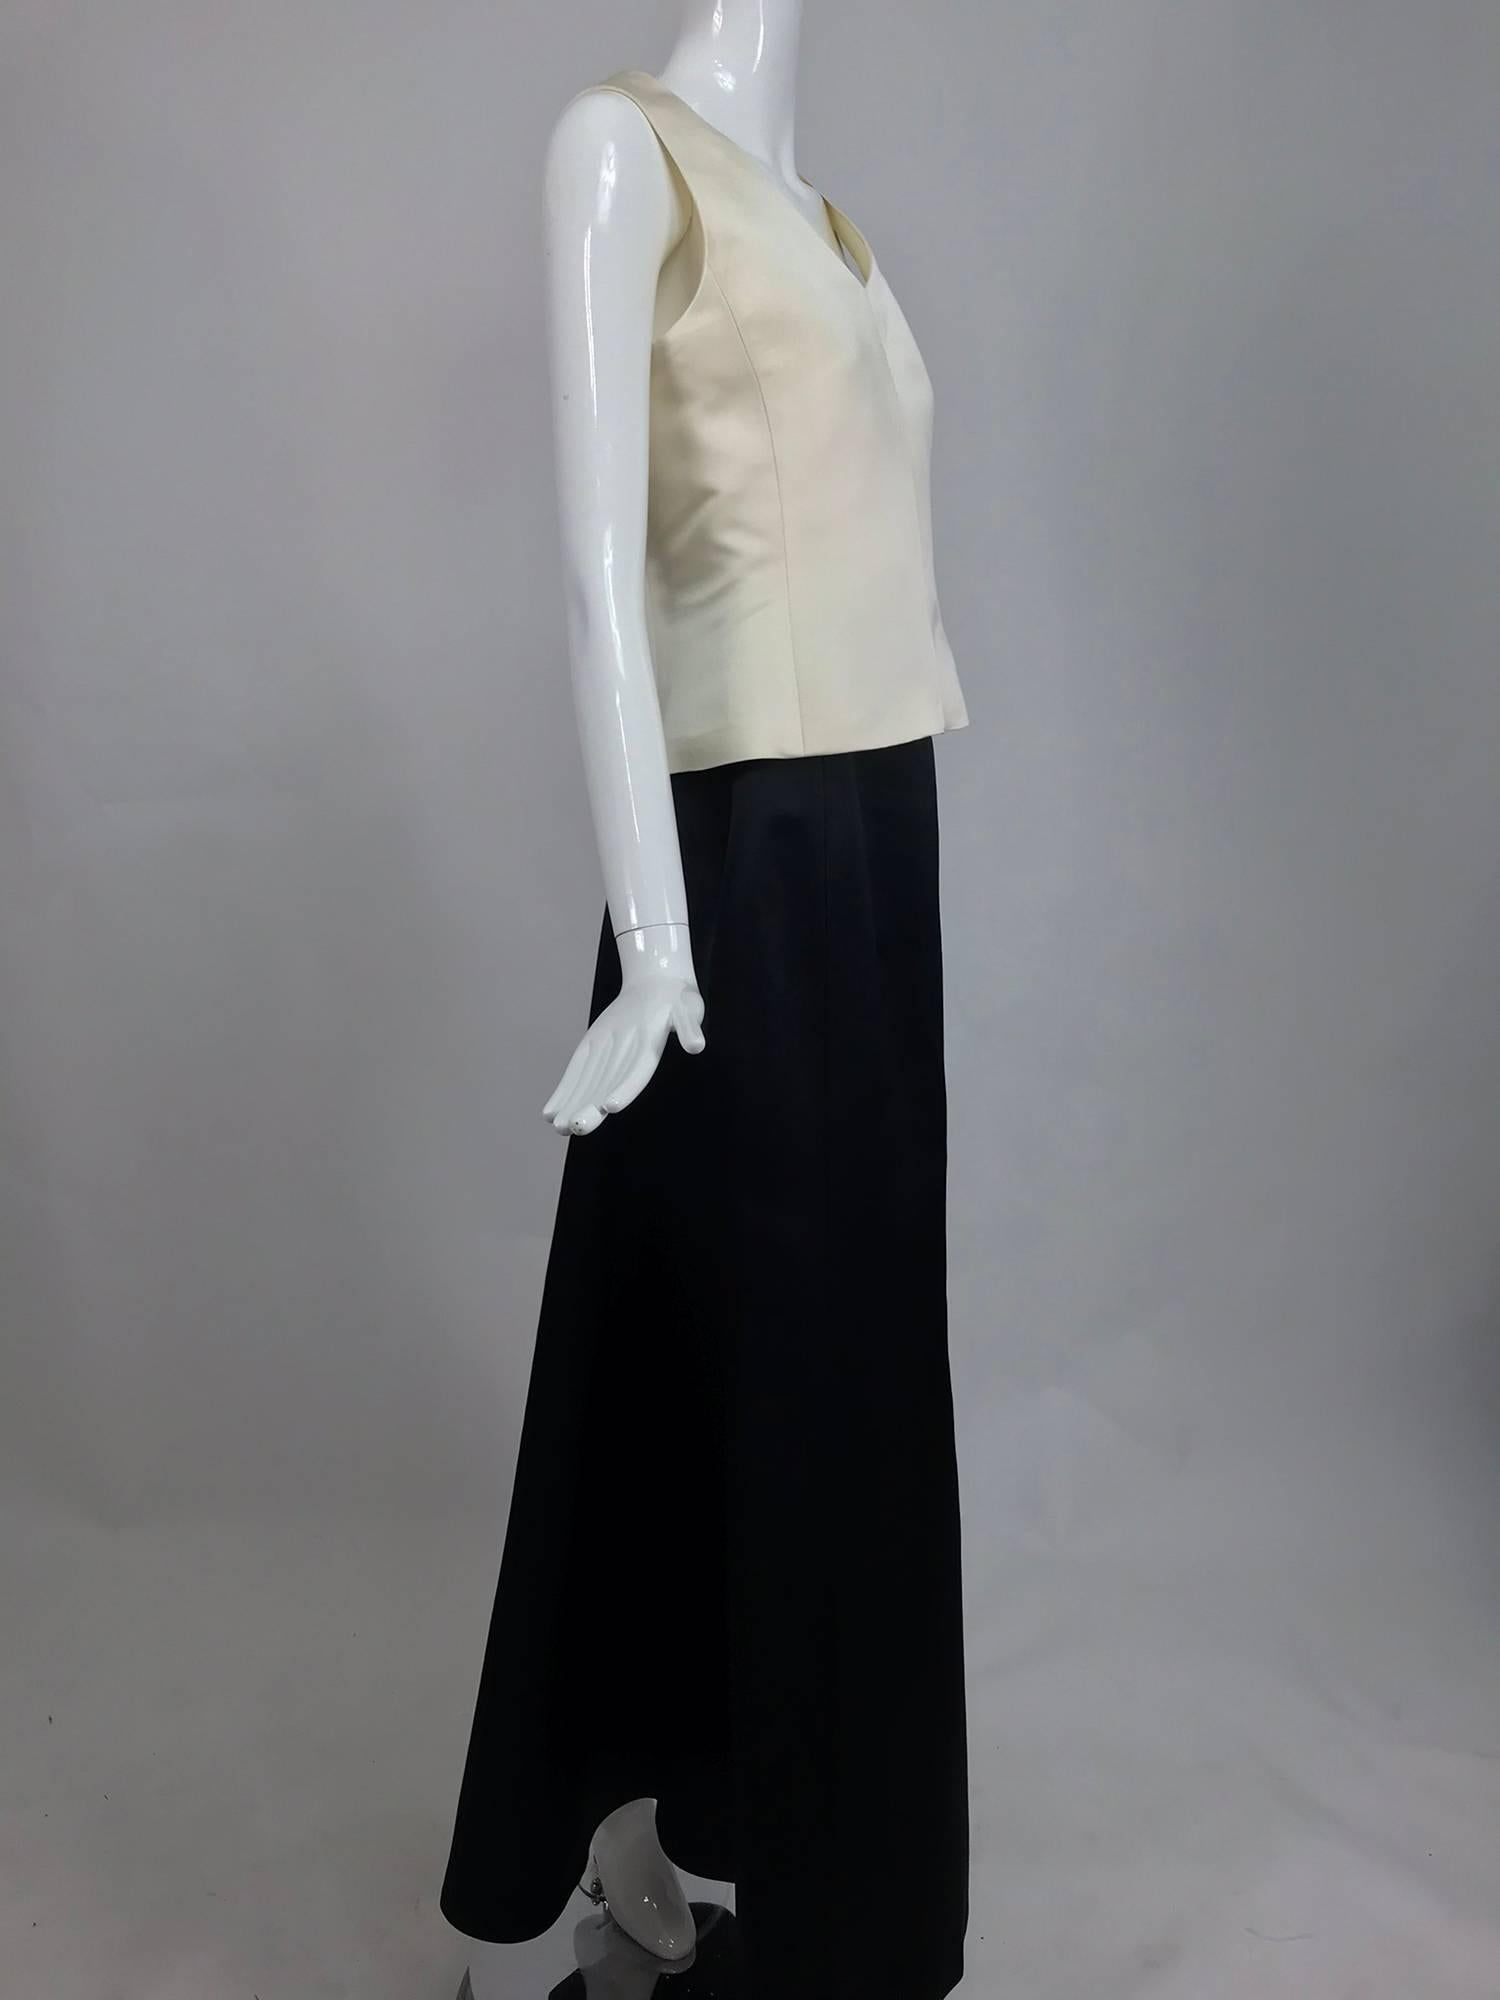 Vintage Bill Blass evening skirt set in cream and black silk satin from the 1980s. Sleeveless princess seamed v neck top is fitted through the waist and flares at the hip, it closes at the back with a zipper, fully lined in silk. The full length